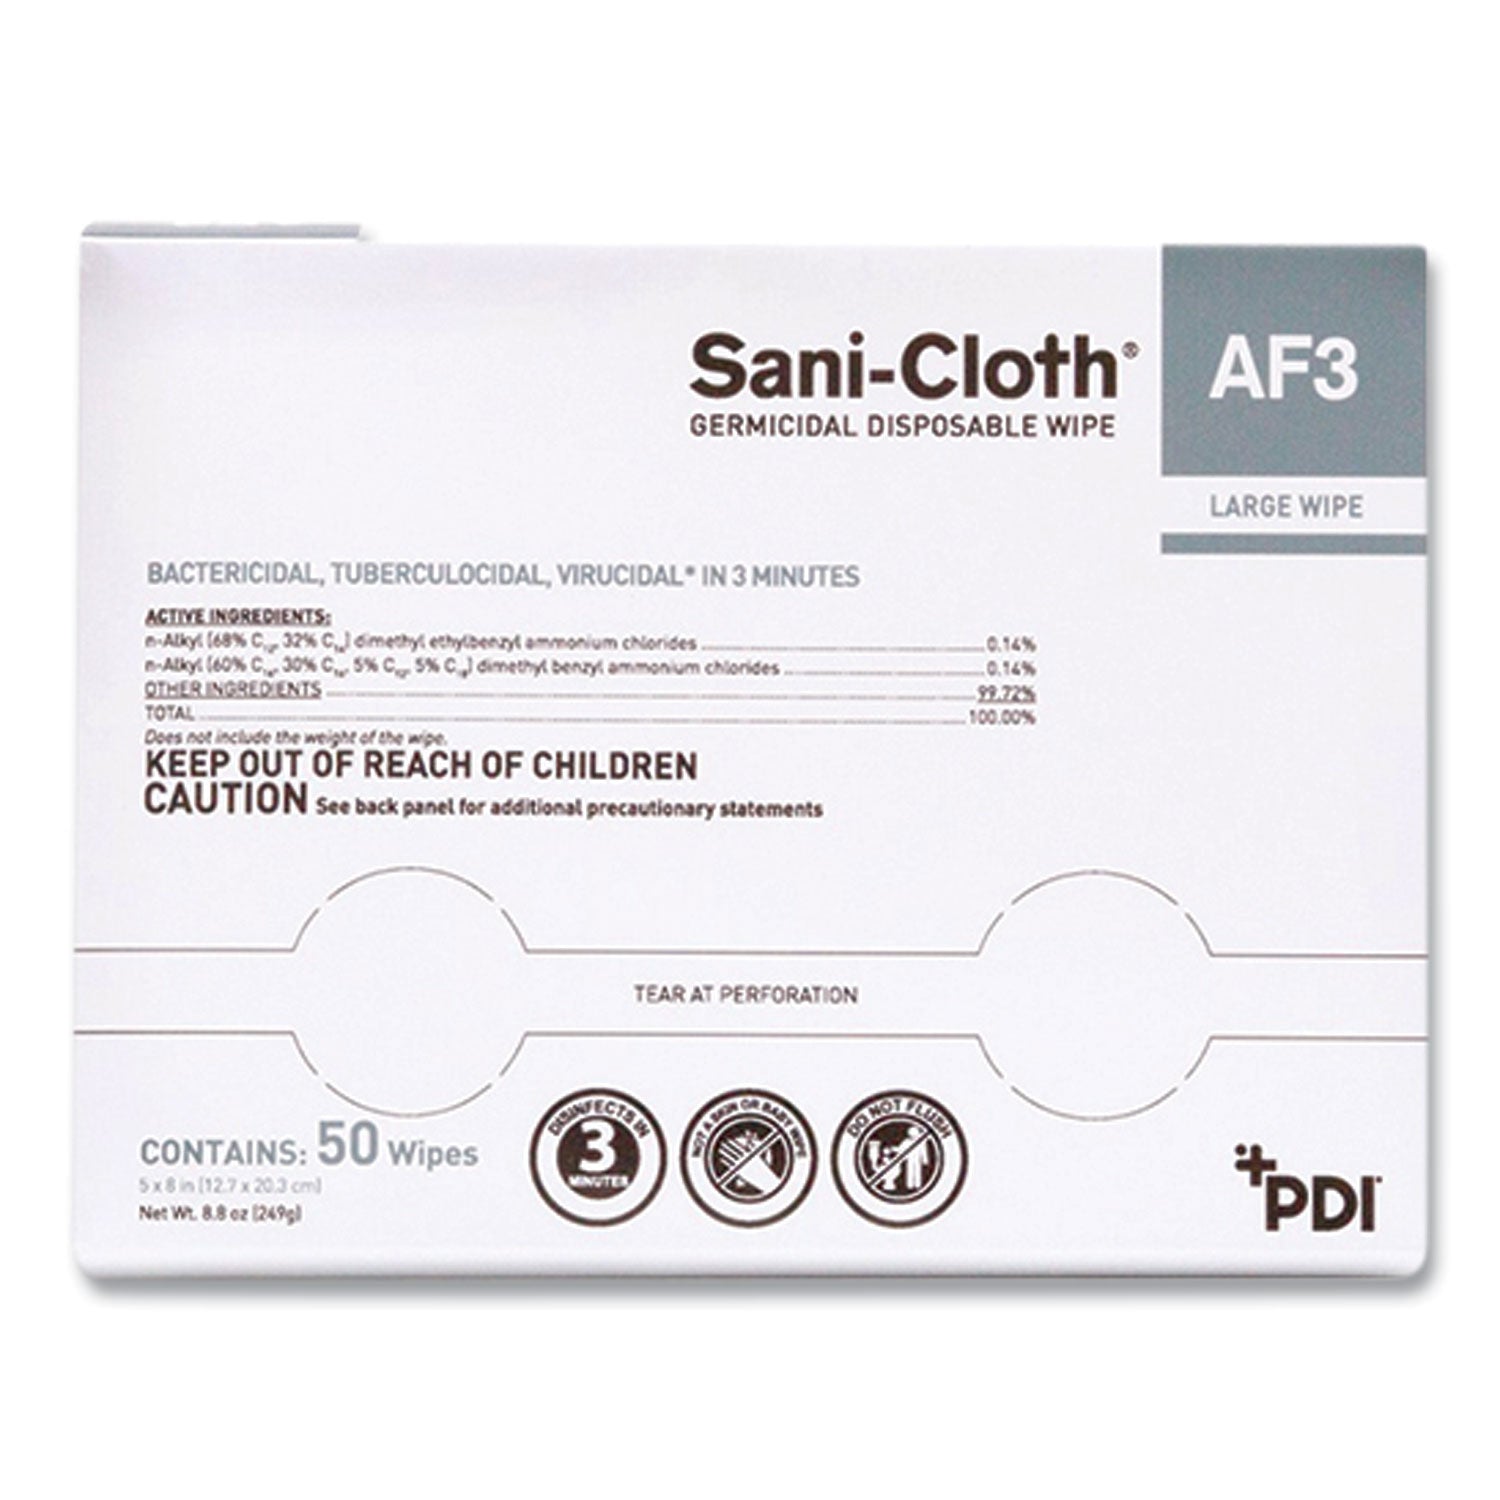 sani-cloth-af3-germicidal-disposable-wipes-large-1-ply-8-x-5-unscented-white-50-pack-10-packs-carton_pdih59200 - 1